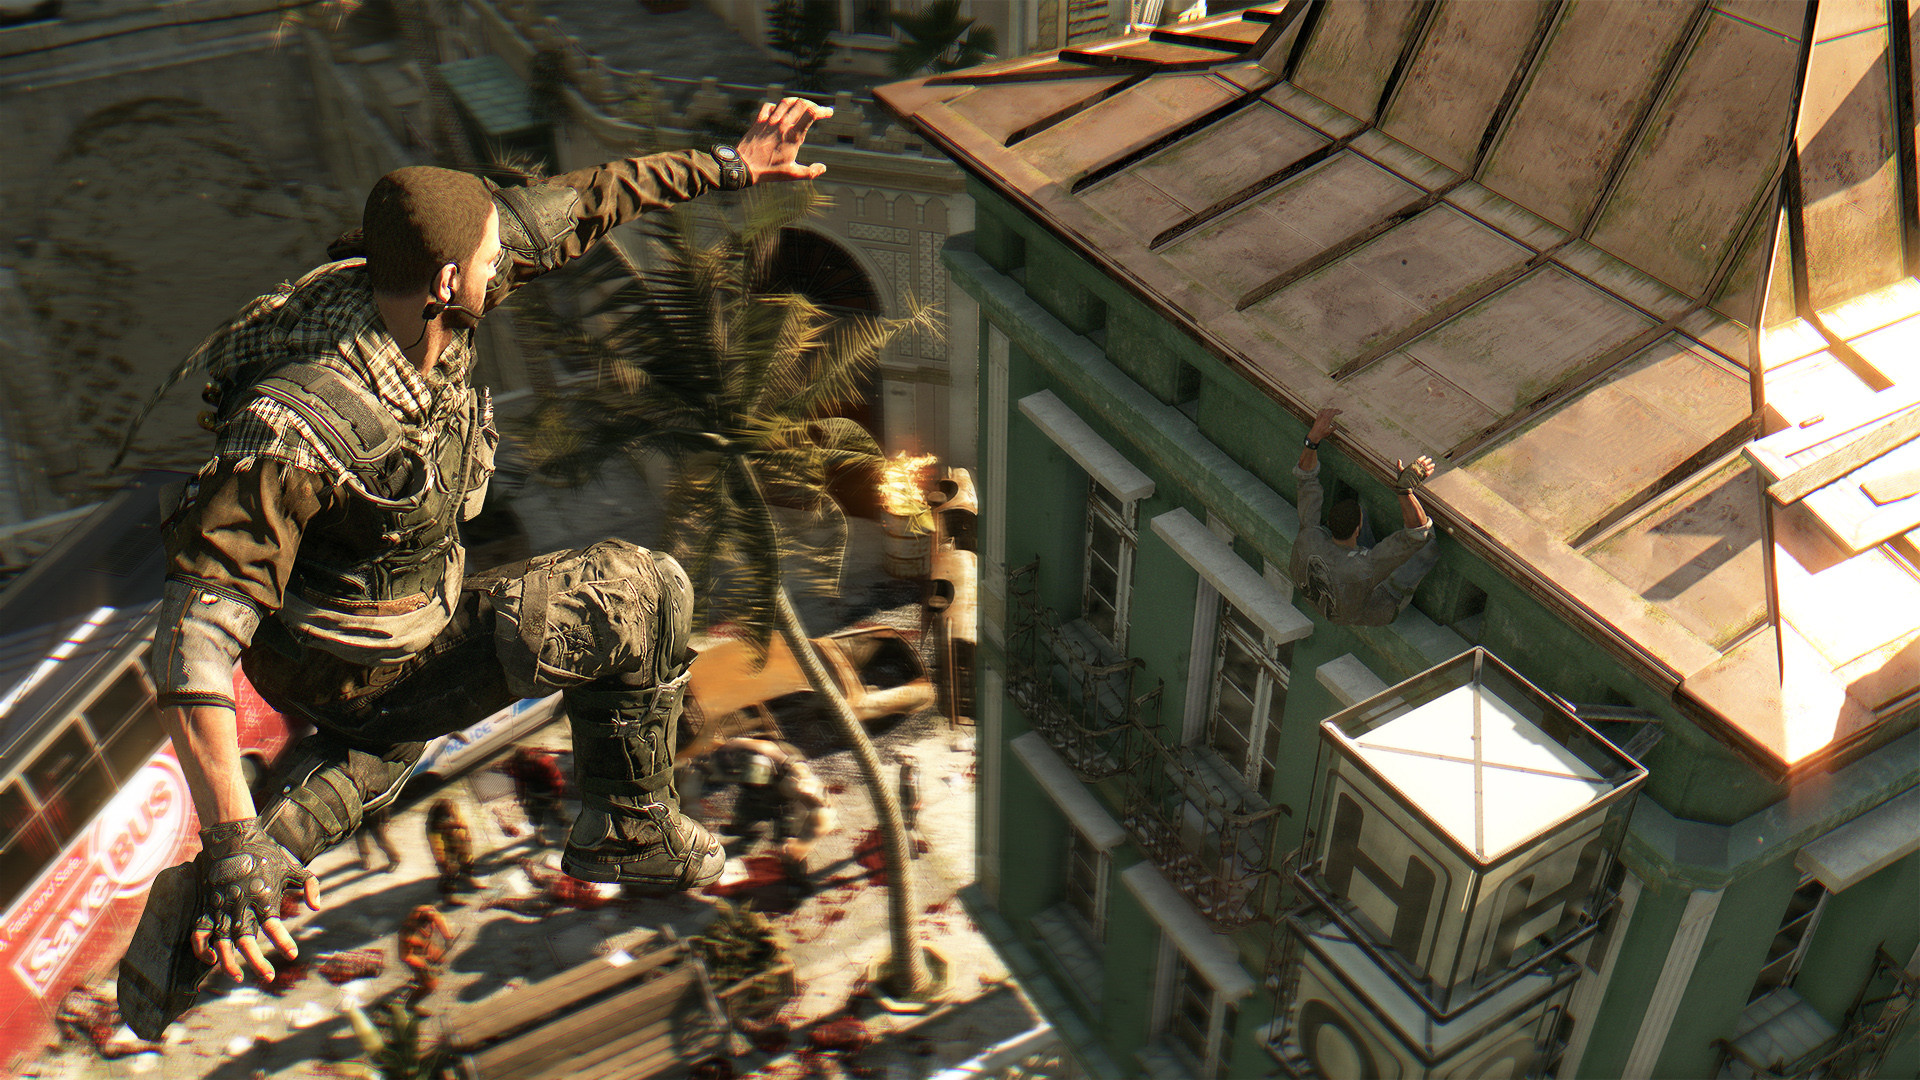 Dying Light: Definitive Edition, PC - Steam